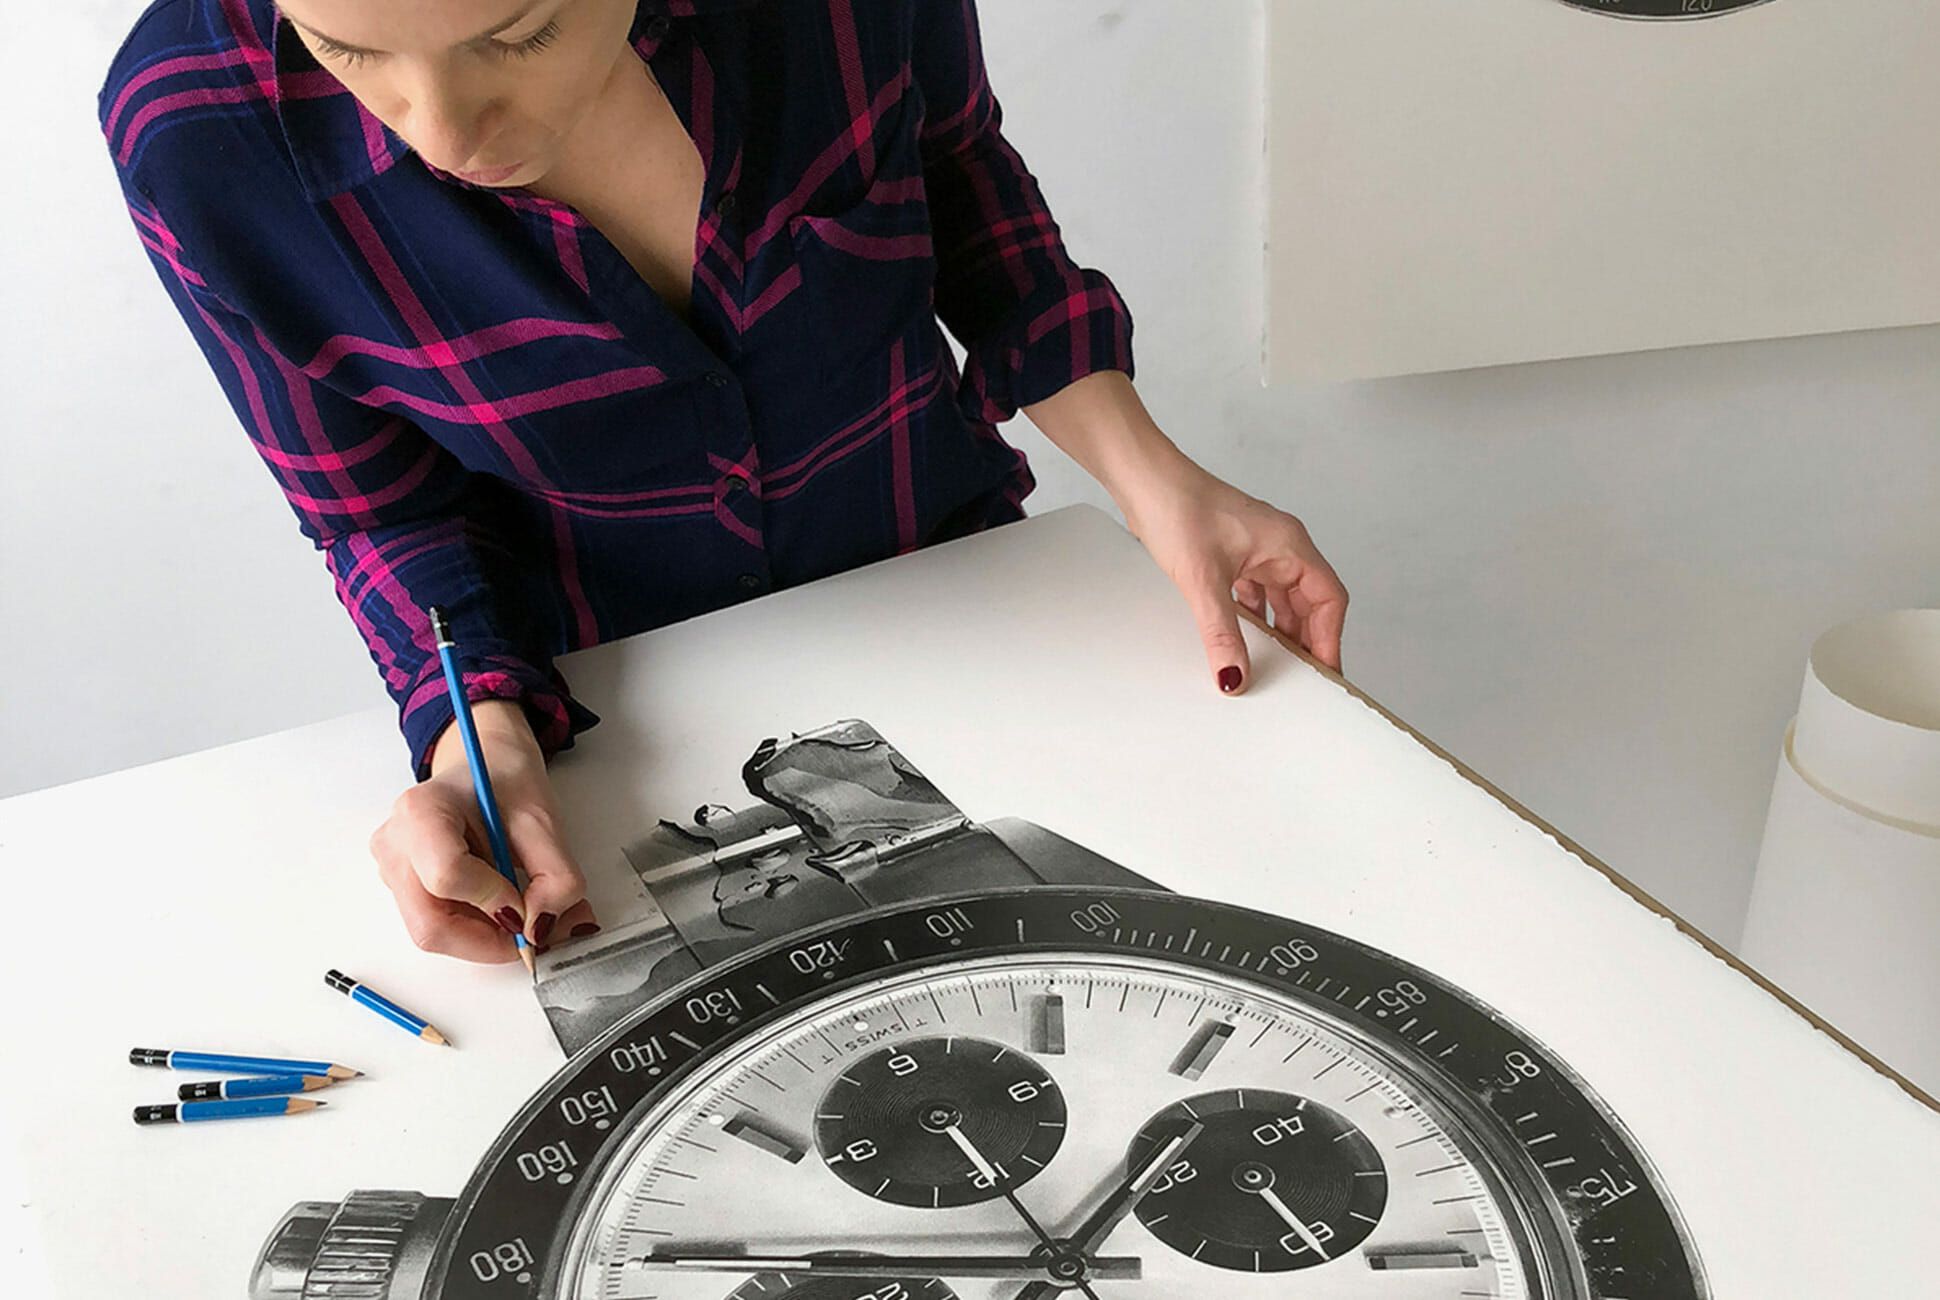 Discover the Spectacular Horological Drawings of Artist Julie Kraulis |  Watches | Sotheby's